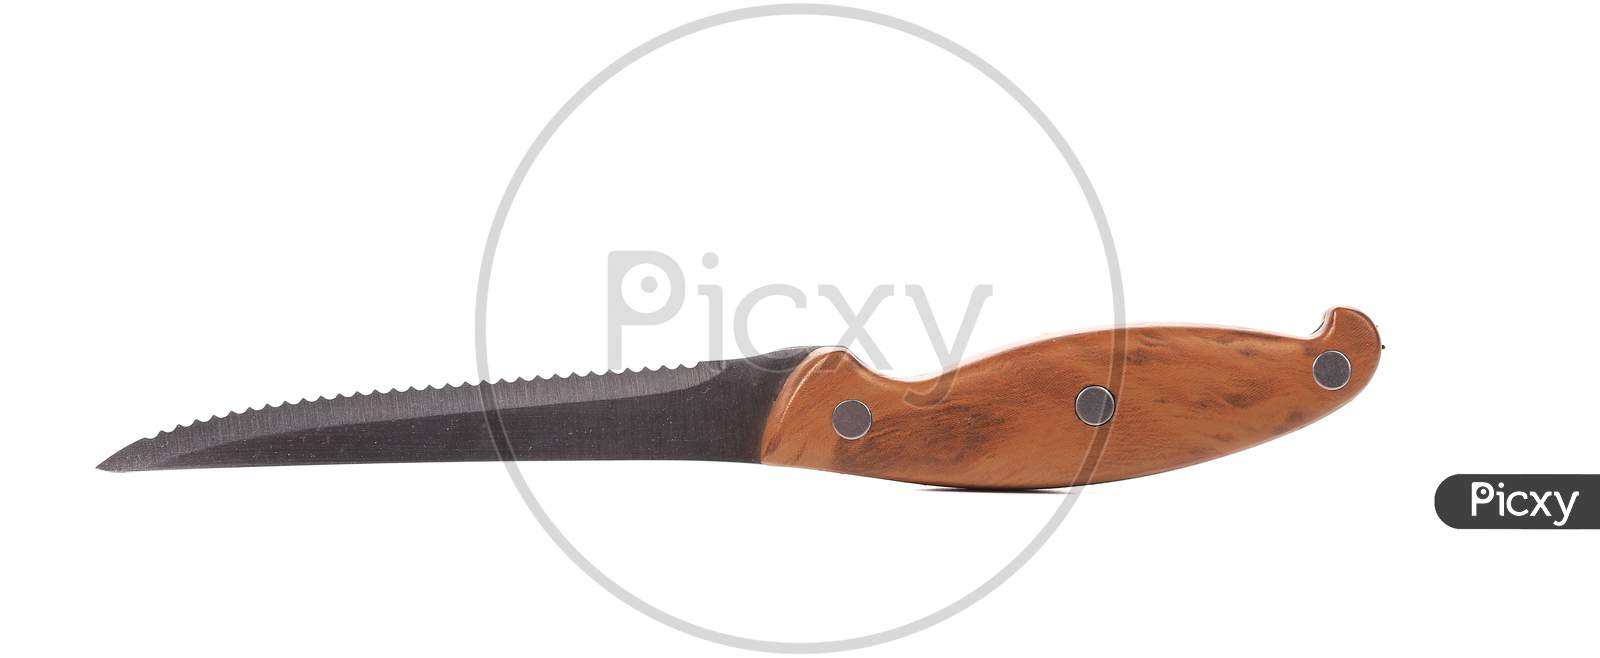 Close Up Of Kitchen Knife. Isolated On A White Background.